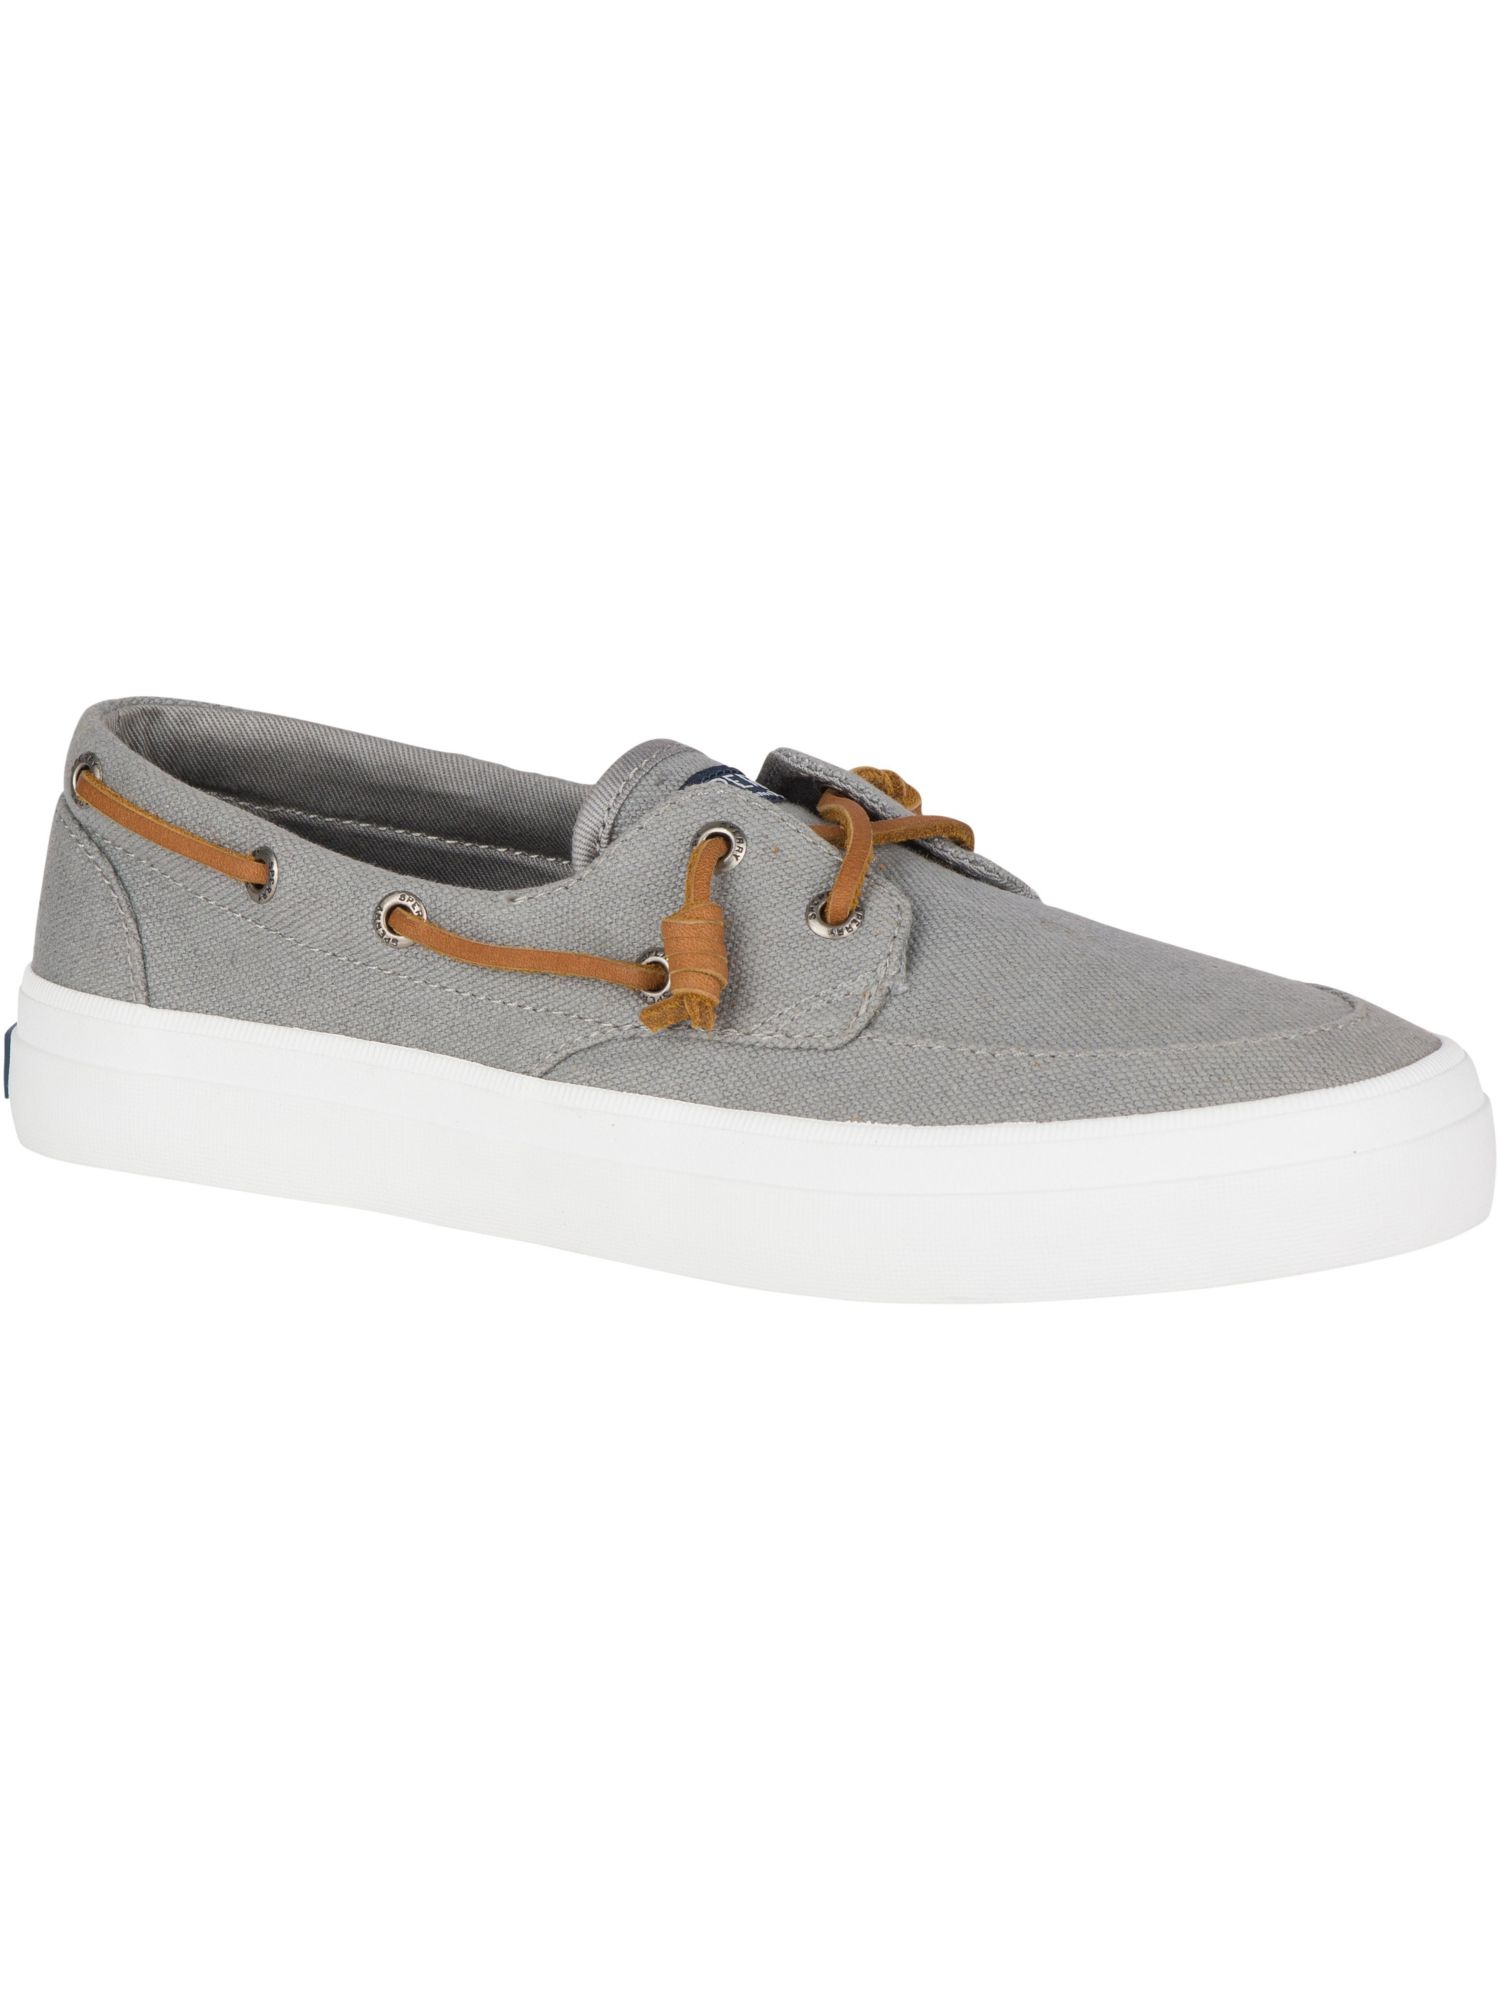 SPERRY Womens Gray Faux Laces Padded Crest Boat Round Toe Platform Slip On Boat Shoes 6 M